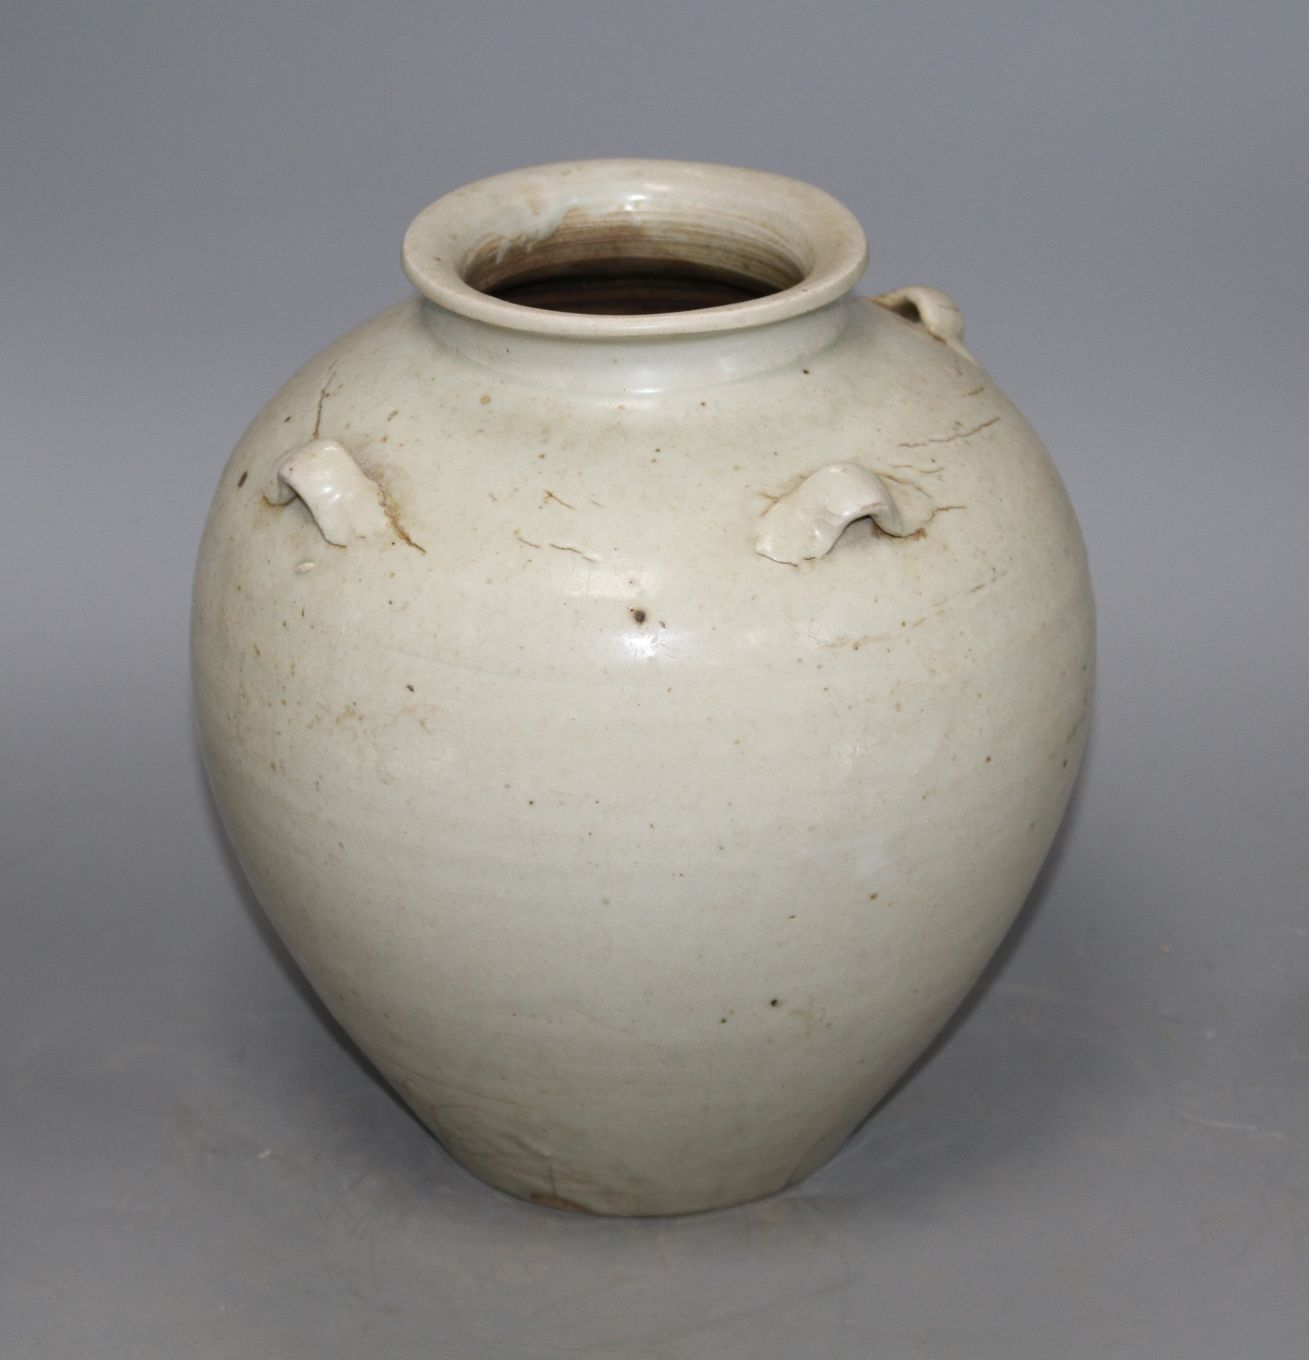 A Chinese Ding type vase, Ming dynasty or later, with loop handles, height 22cm Condition: Natural